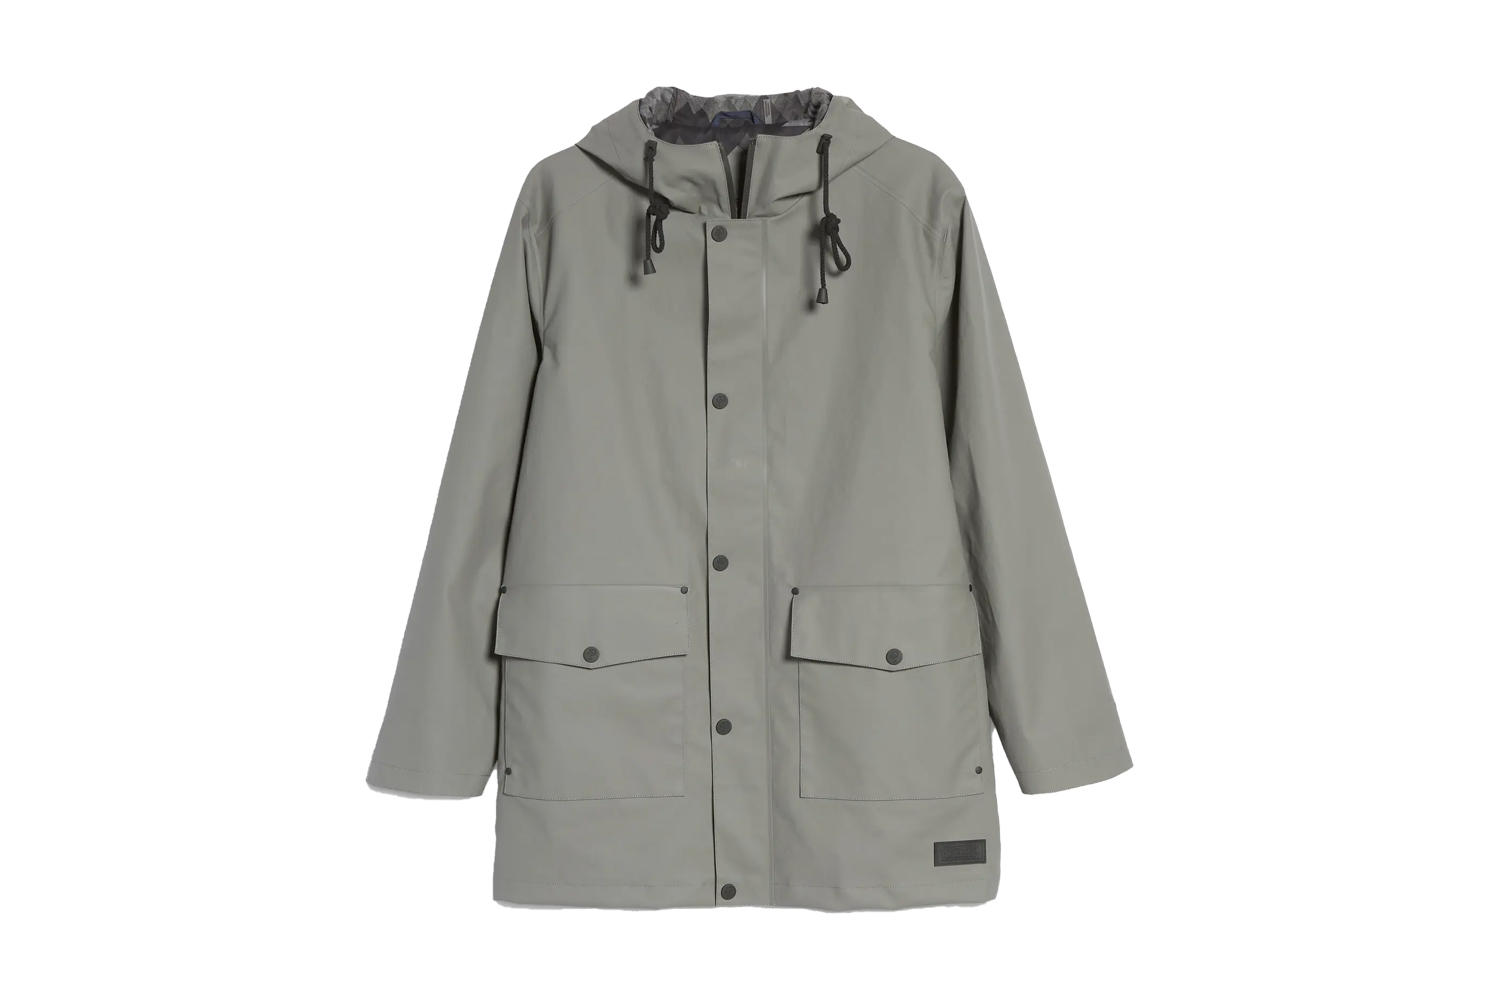 The Pendleton Seal Rock Rain Jacket is the best commuter rain jacket in 2022, chosen for its blend of functionality and style